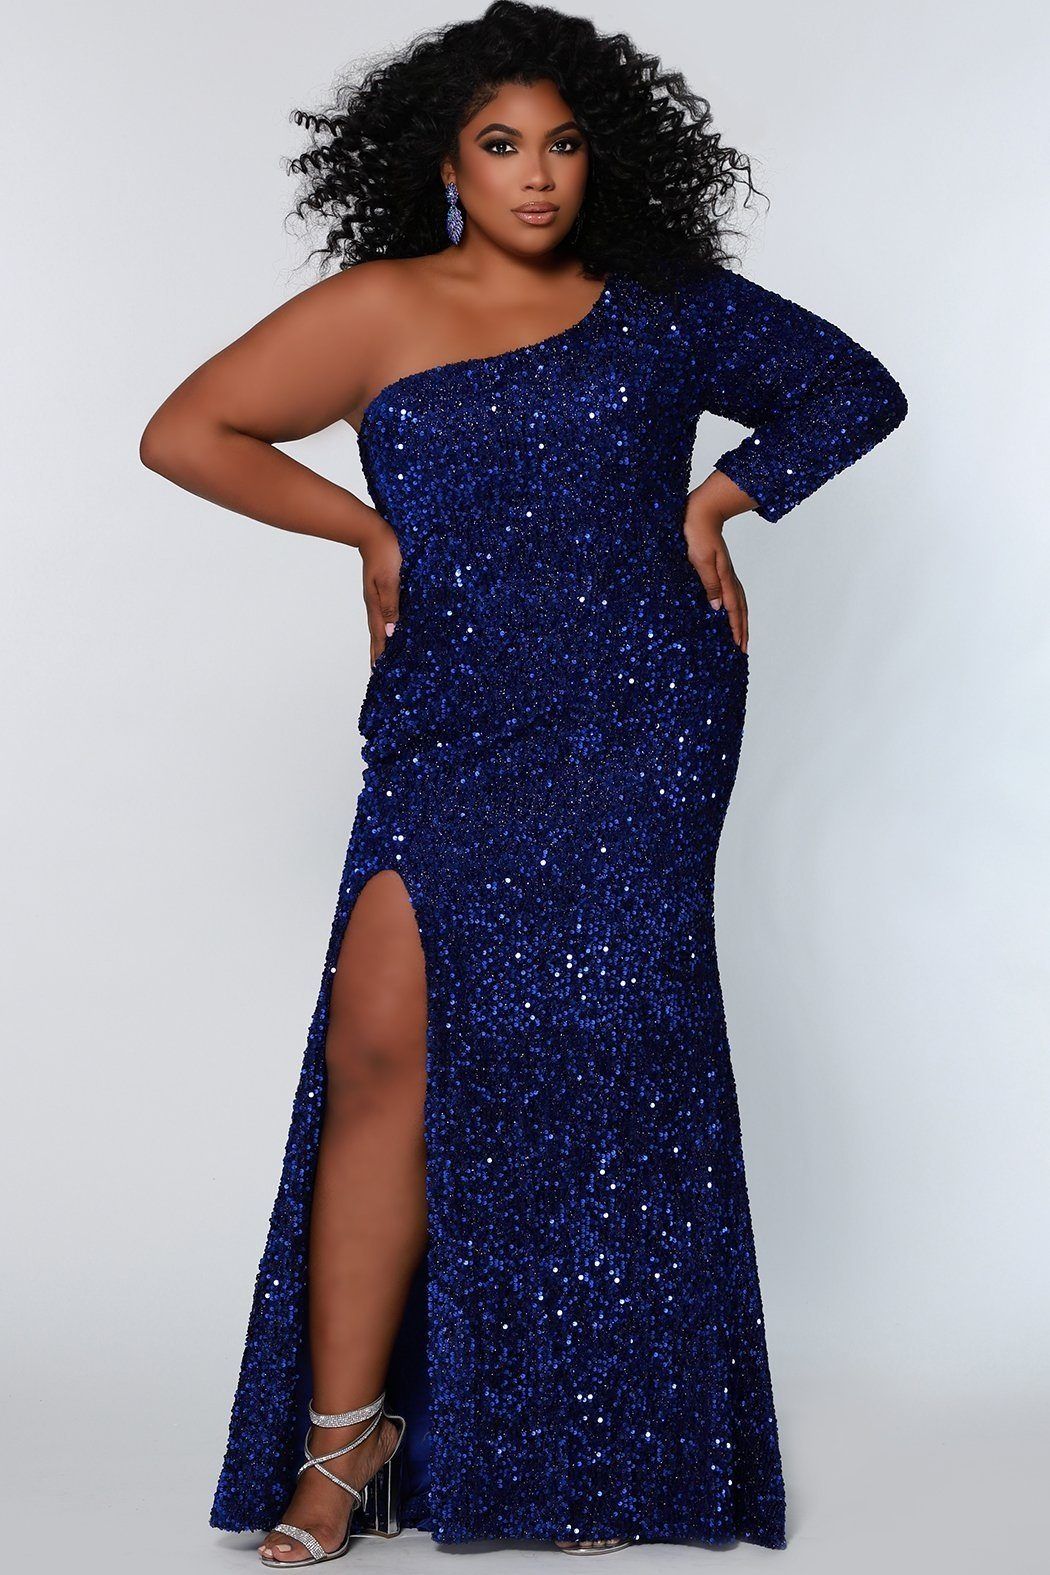 Style SC7319 Sydney's Closet Plus Size 34 Prom Royal Blue Side Slit Dress on Queenly